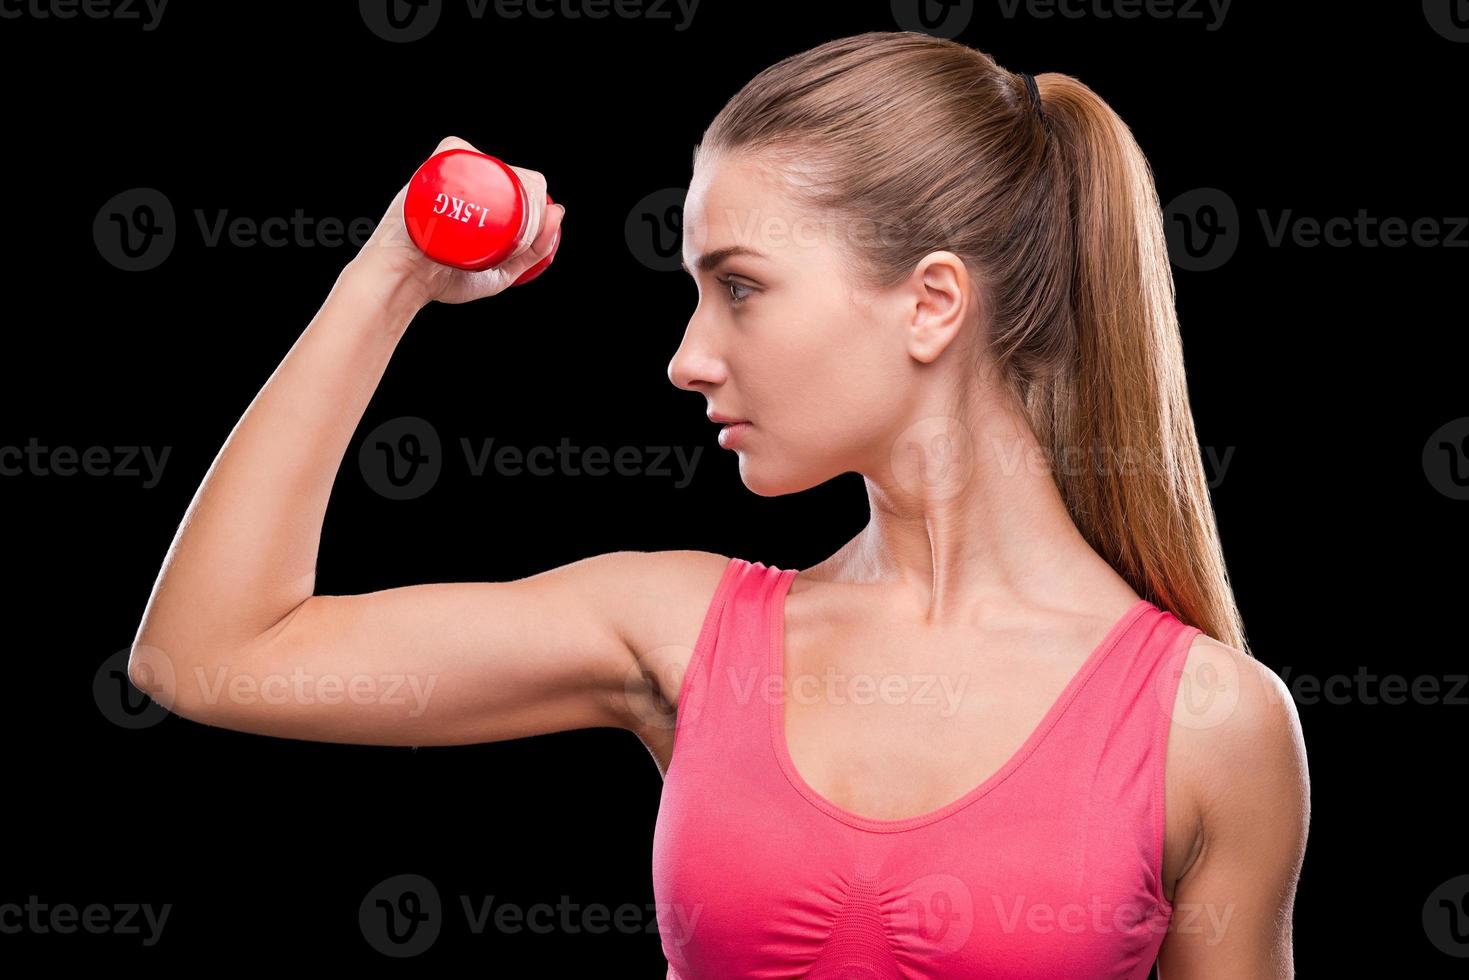 Keeping her body fit. Sporty young woman exercising with dumbbell while standing against black background photo